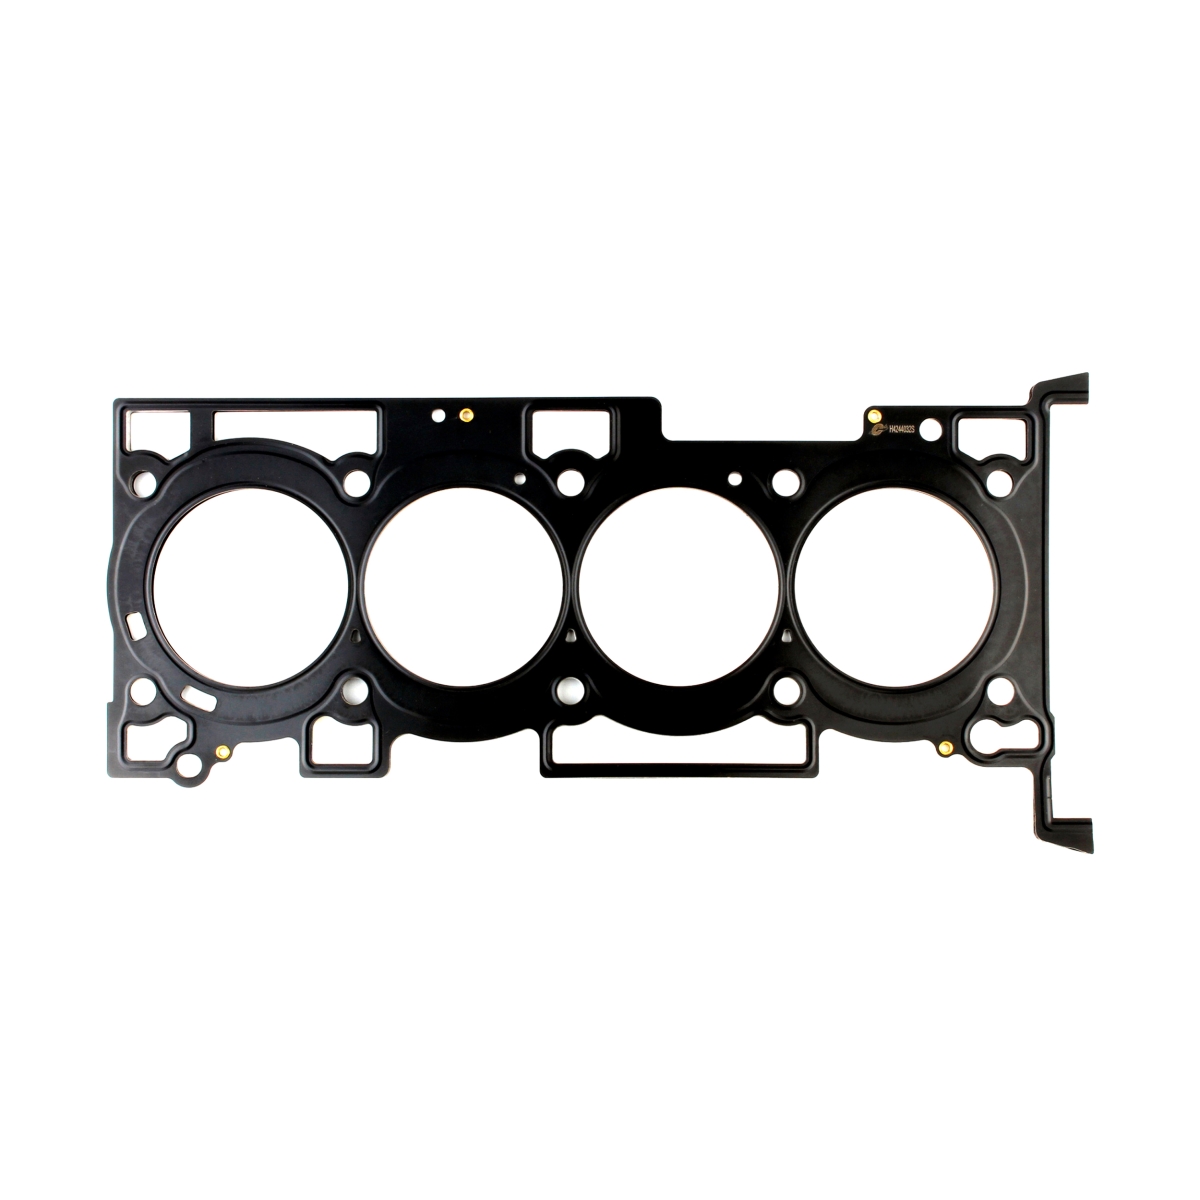 Cometic Gasket C4953-032 0.32 in. 88 mm Bore MLZ Turbo Cylinder Head Gasket for 2013-2019 Hyundai Santa Fe -  HK STAR BRIGHT LIGHTING LIMITED